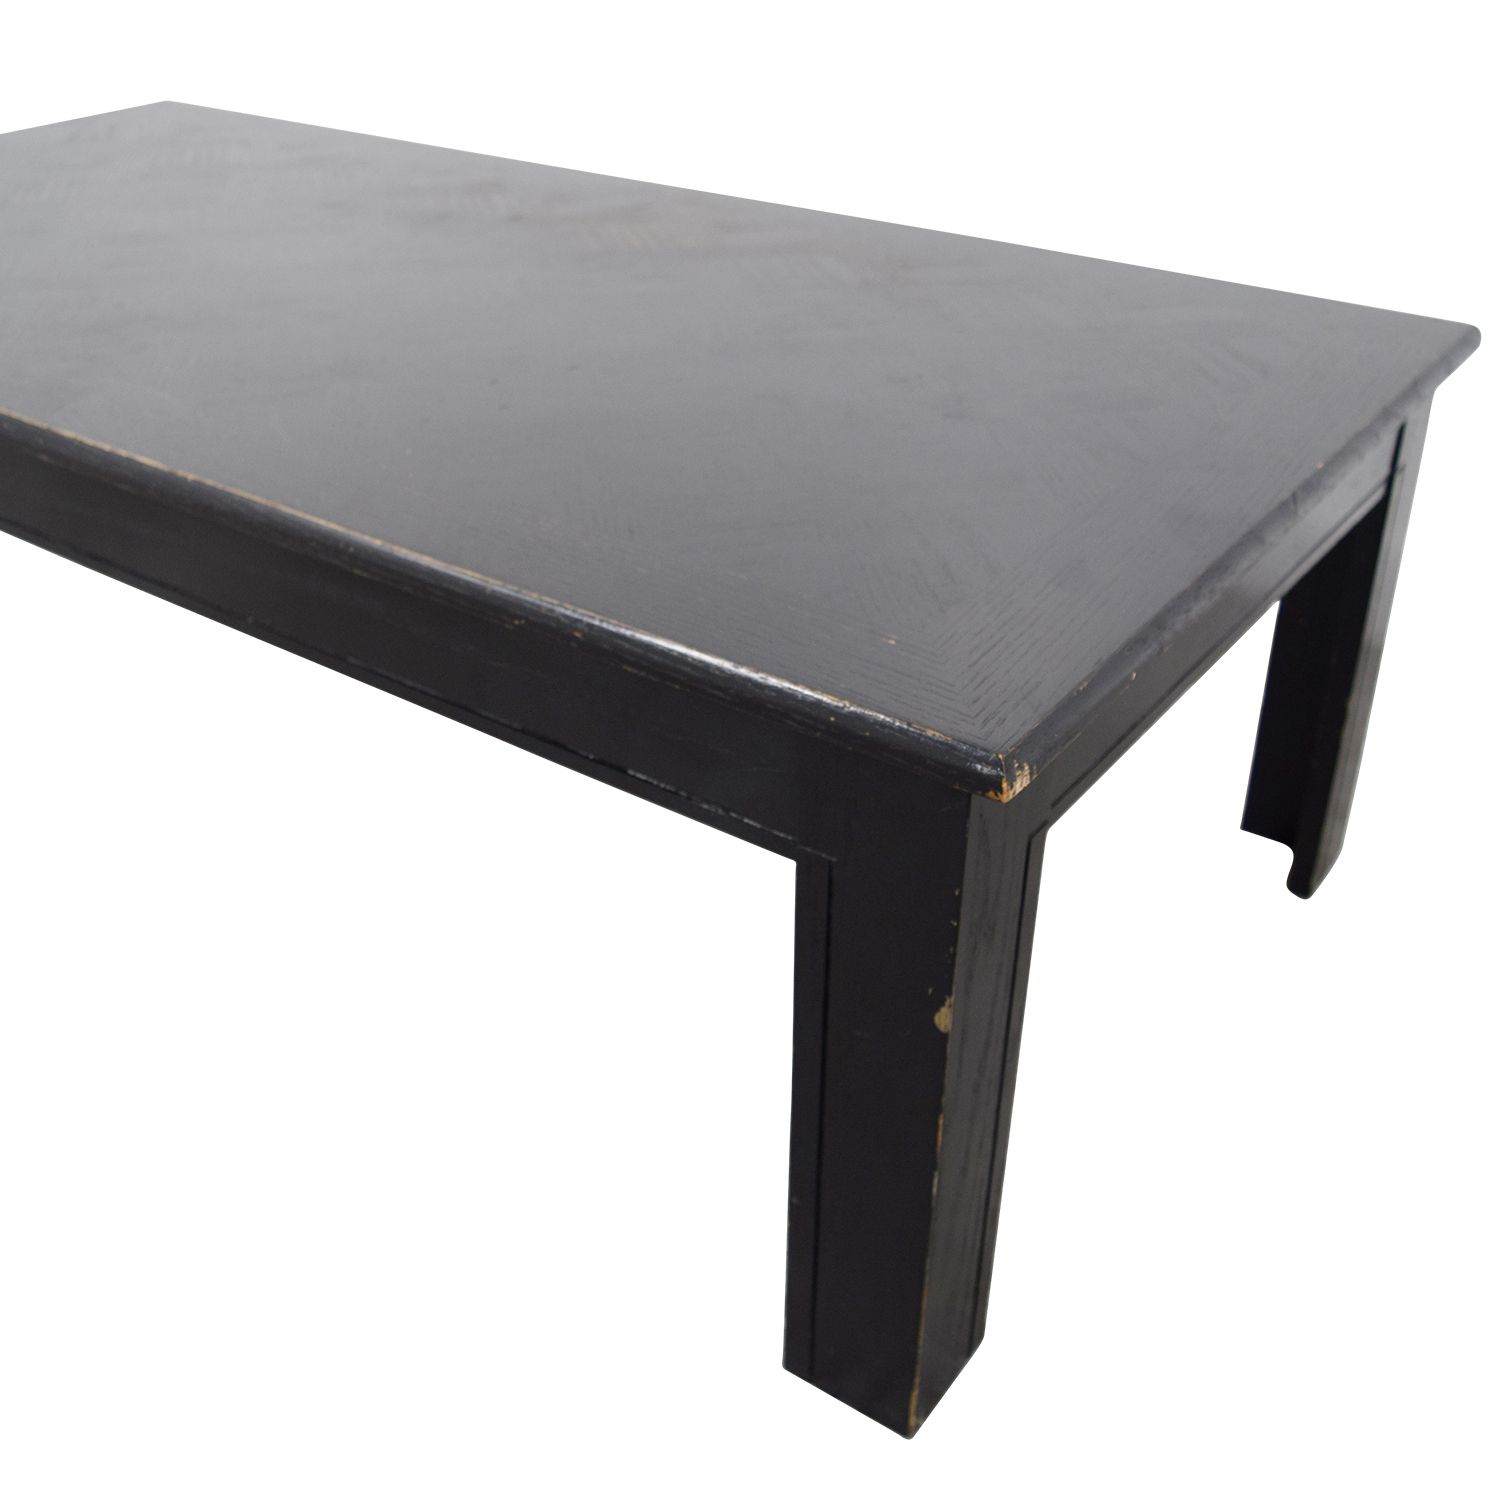 [%69% Off – Black Rectangular Coffee Table / Tables Within Most Current Black And White Coffee Tables|black And White Coffee Tables Intended For 2018 69% Off – Black Rectangular Coffee Table / Tables|favorite Black And White Coffee Tables In 69% Off – Black Rectangular Coffee Table / Tables|latest 69% Off – Black Rectangular Coffee Table / Tables Within Black And White Coffee Tables%] (View 11 of 20)